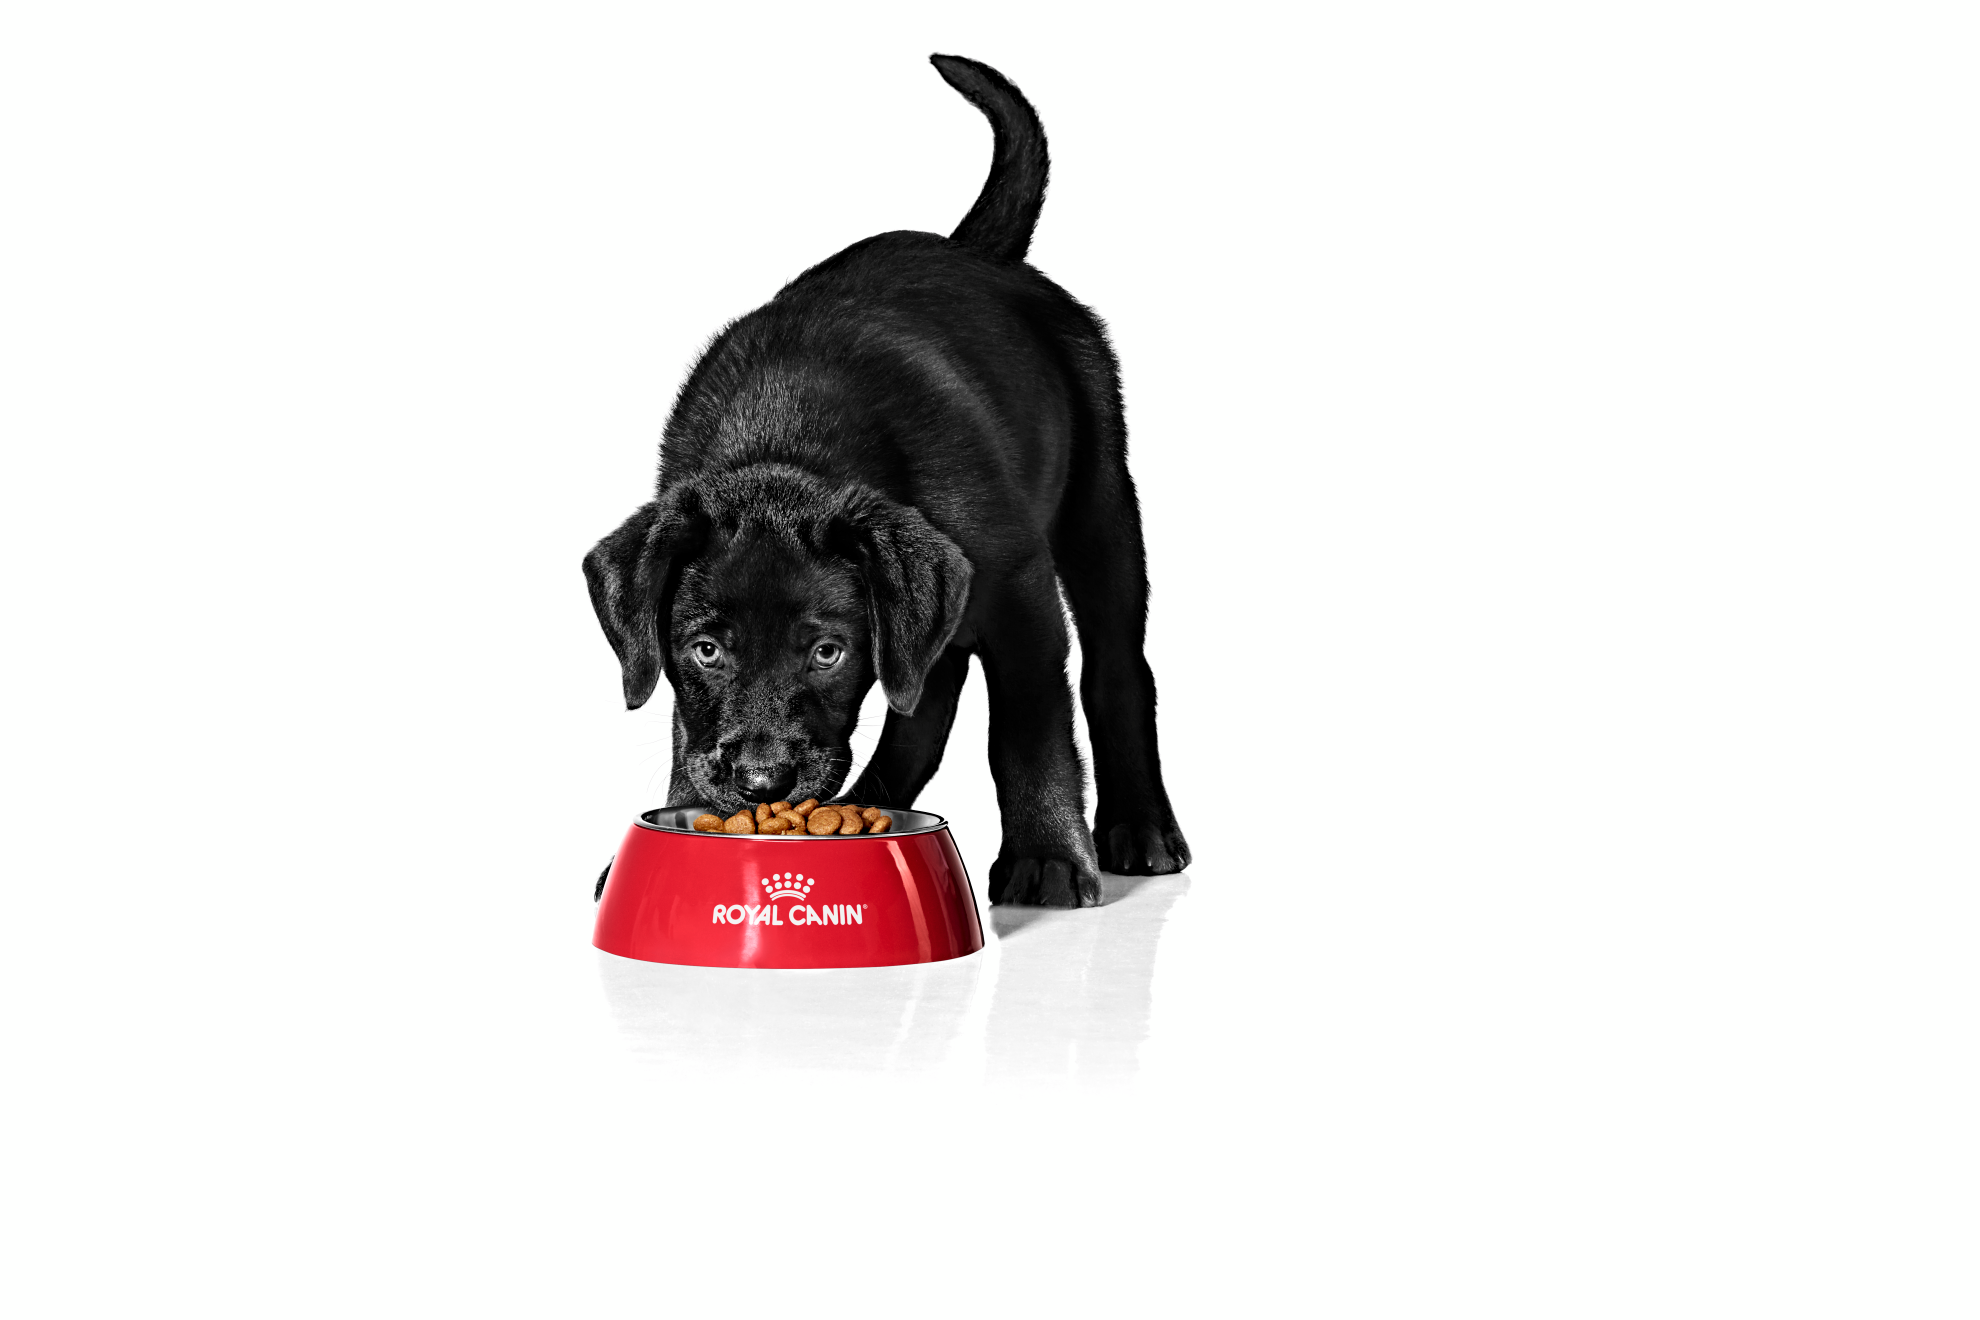 Black Labrador puppy in black and white eating from a red bowl